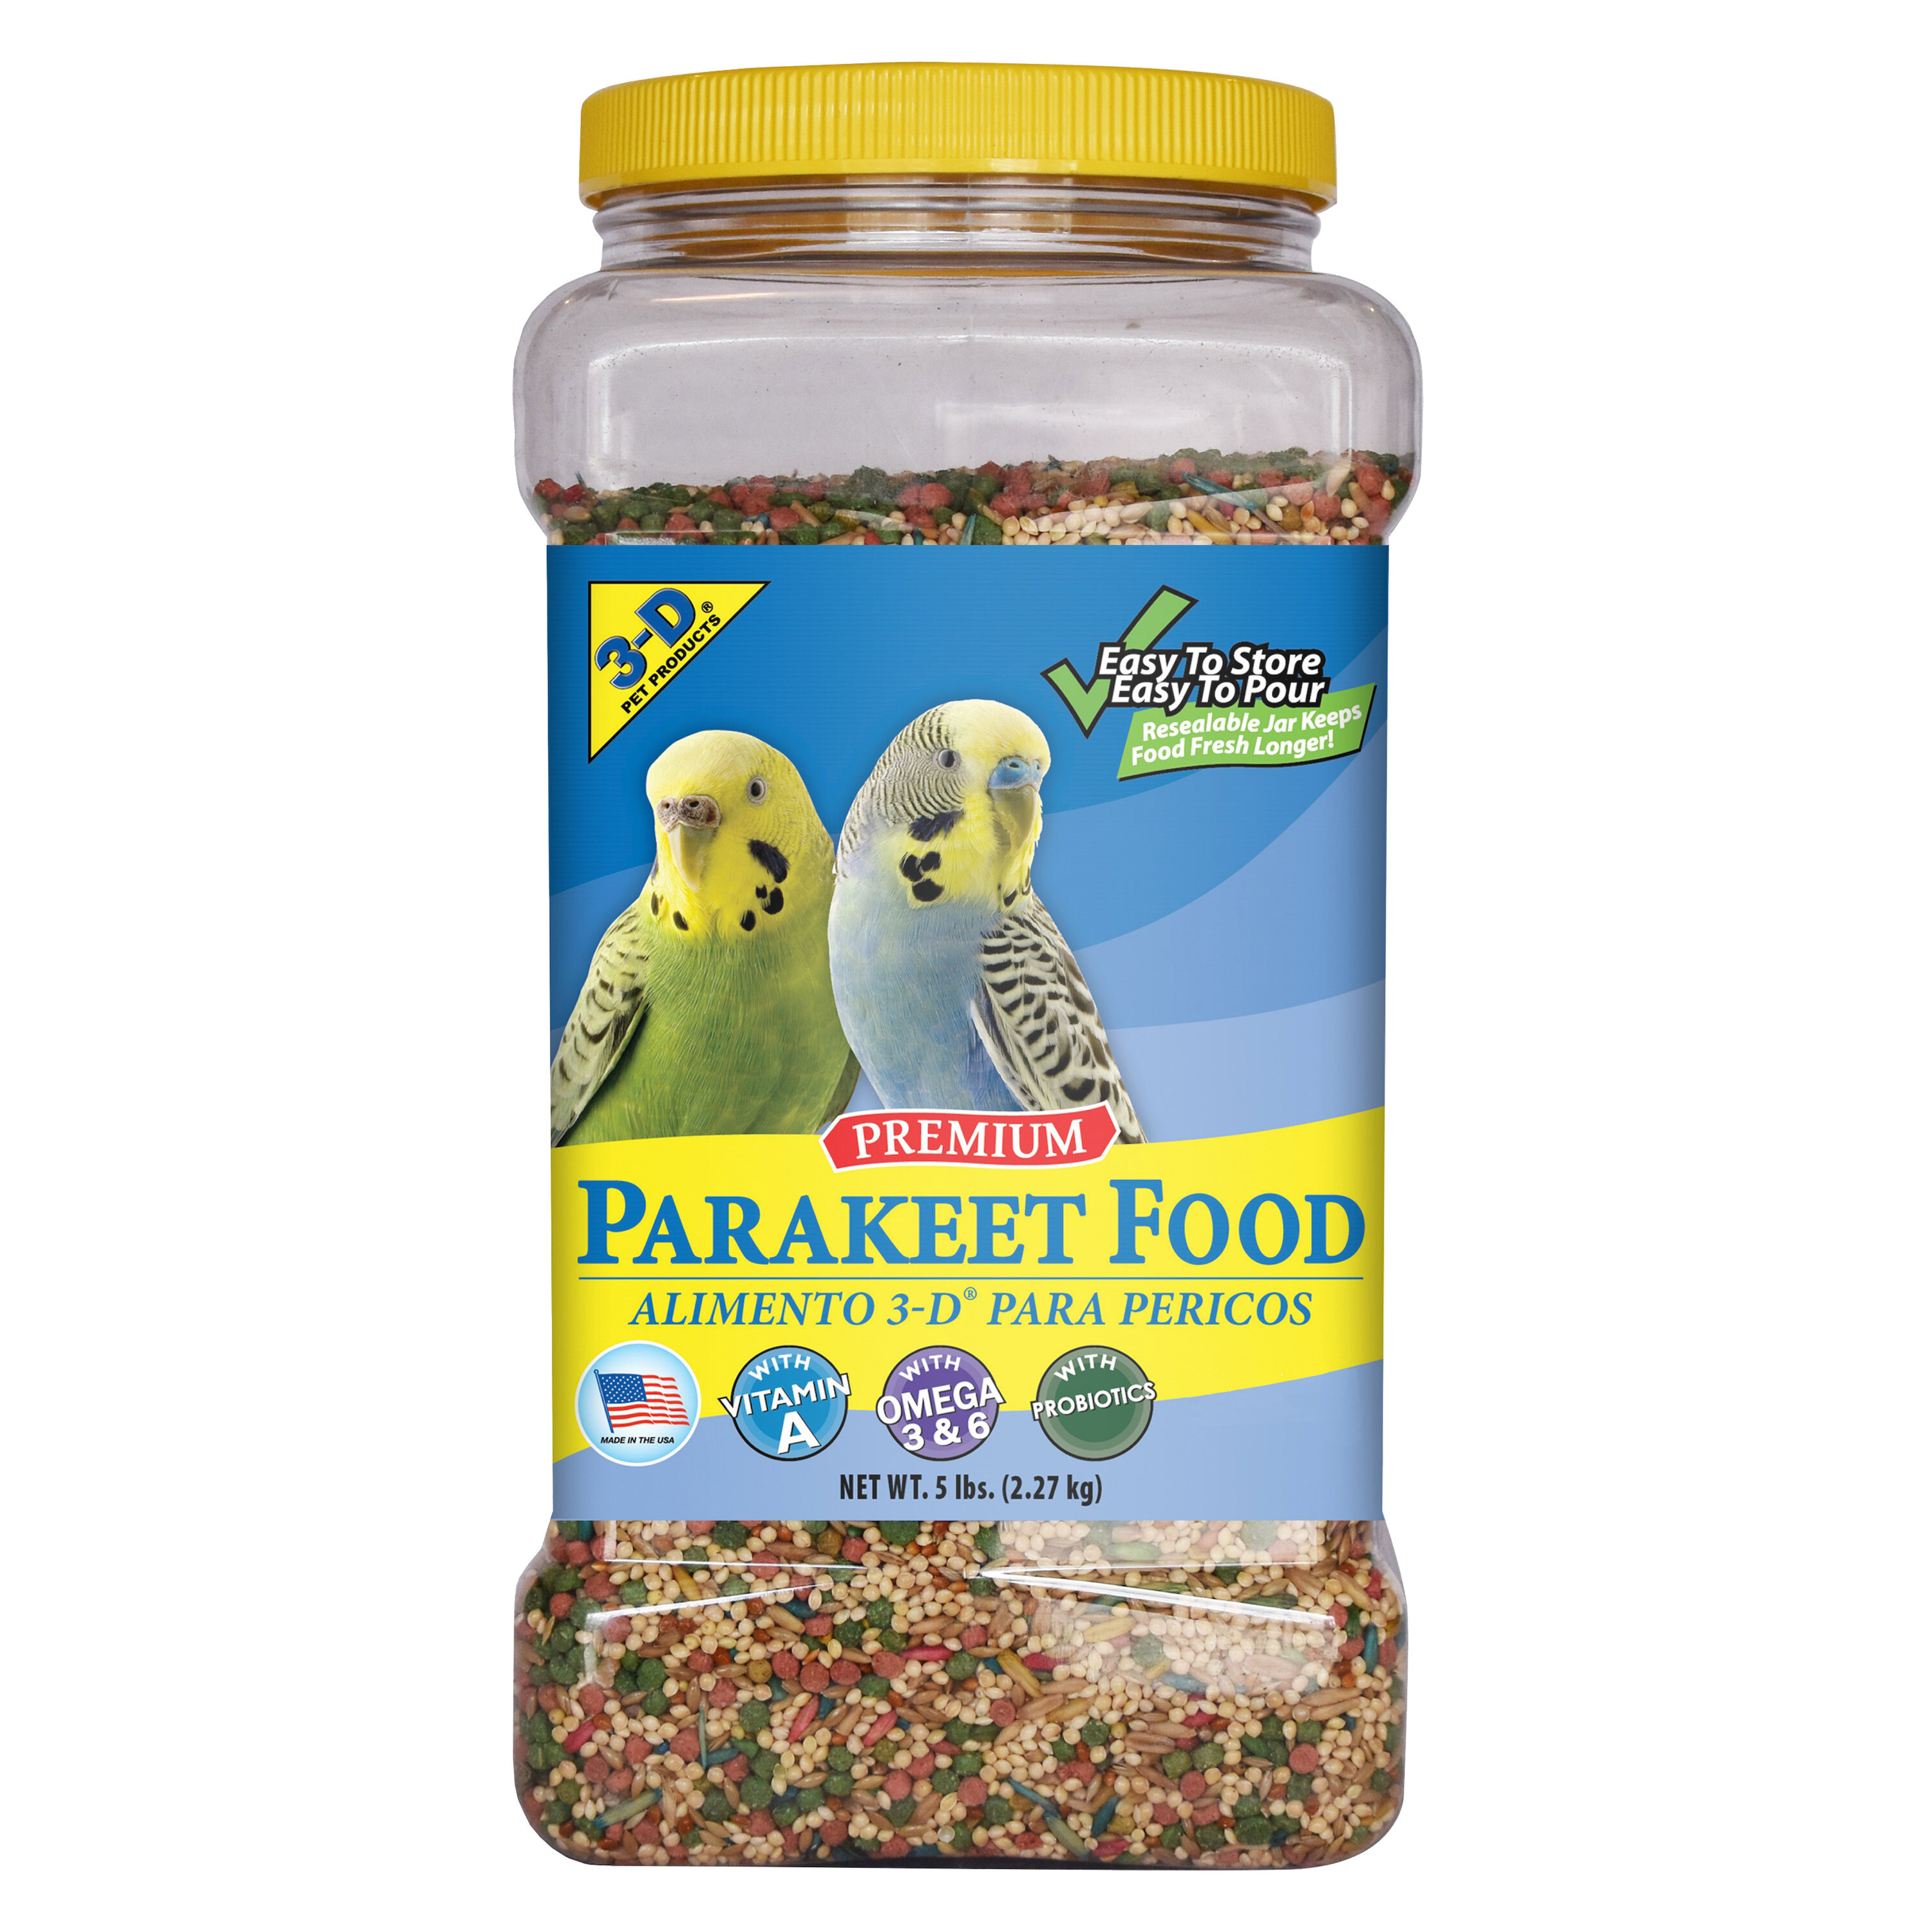 3-D Pet Products Premium Parakeet Food, with Probiotics, 5.0 lb. Stay Fresh Jar, for Daily Feeding - image 1 of 15